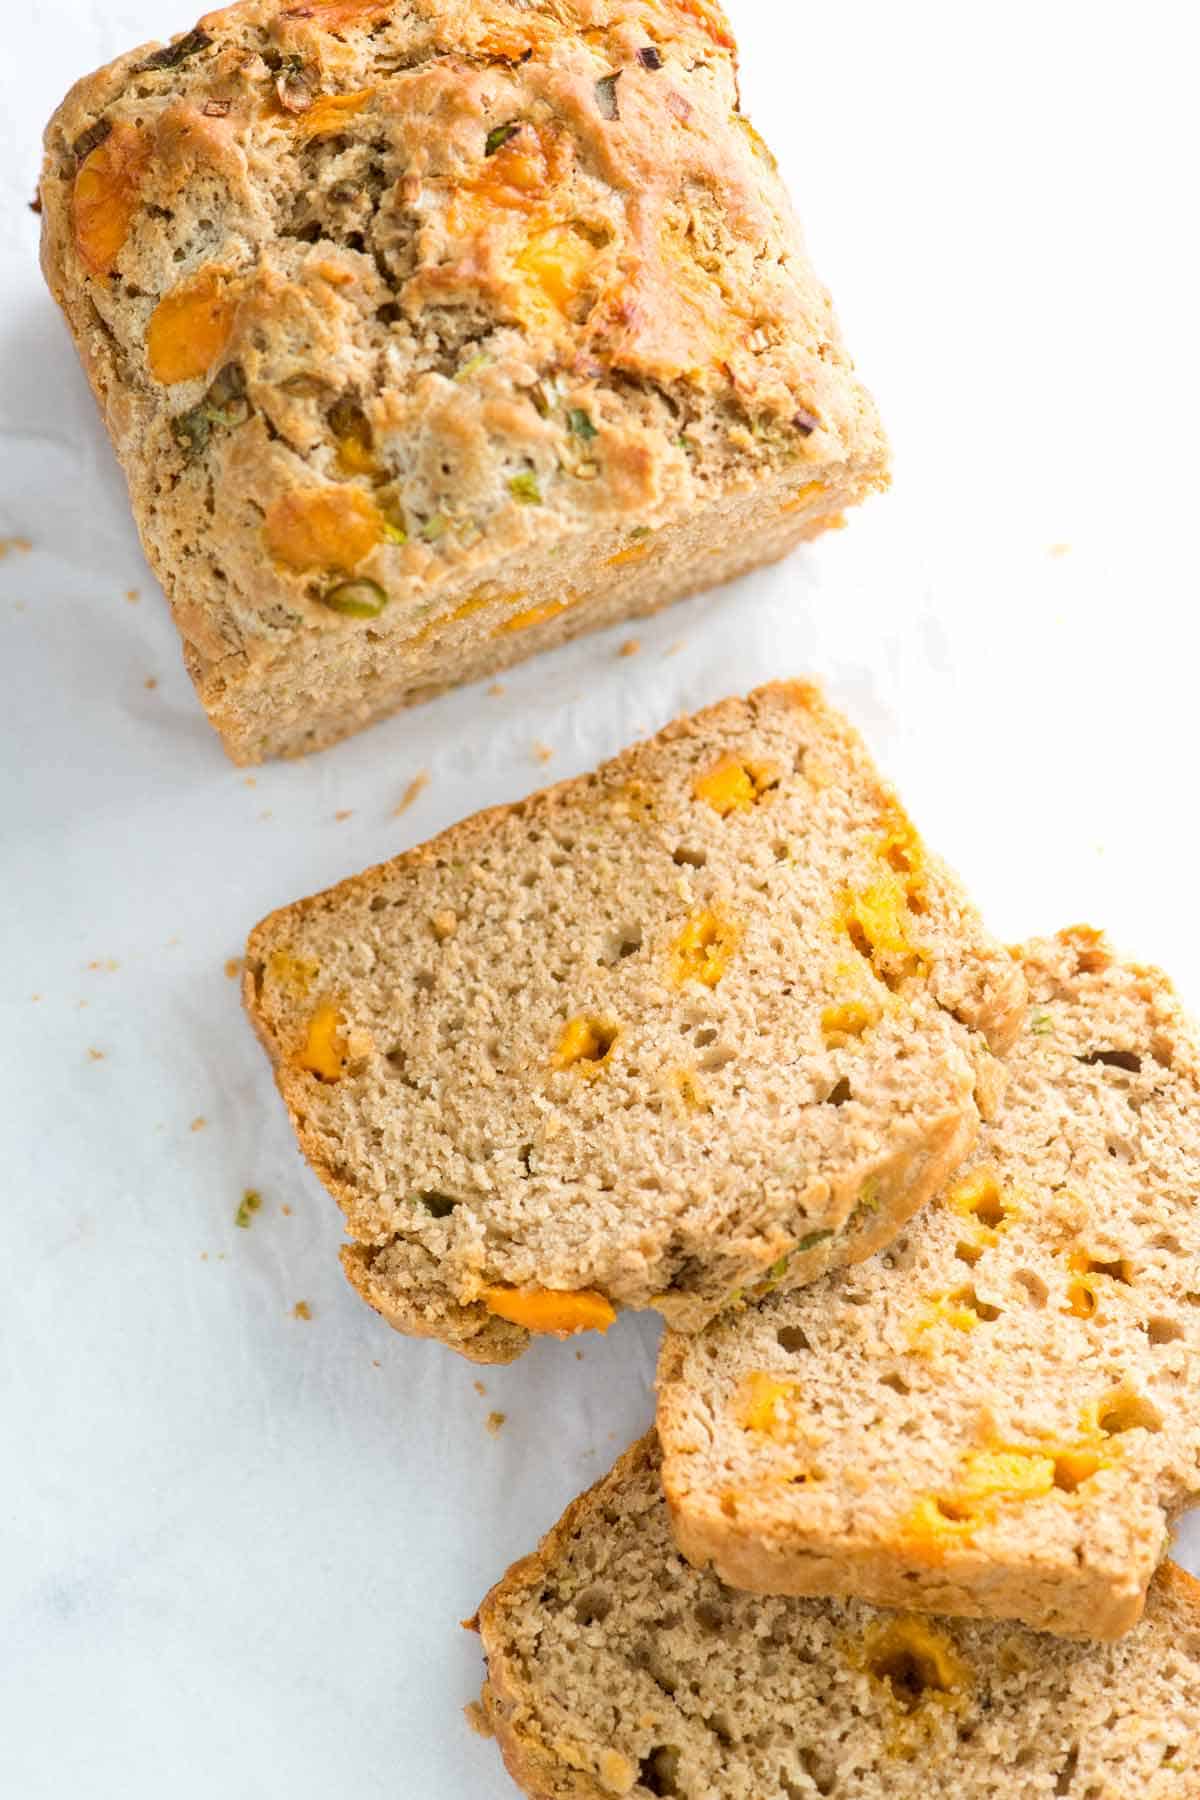 How to Make Cheddar Beer Bread with Scallions